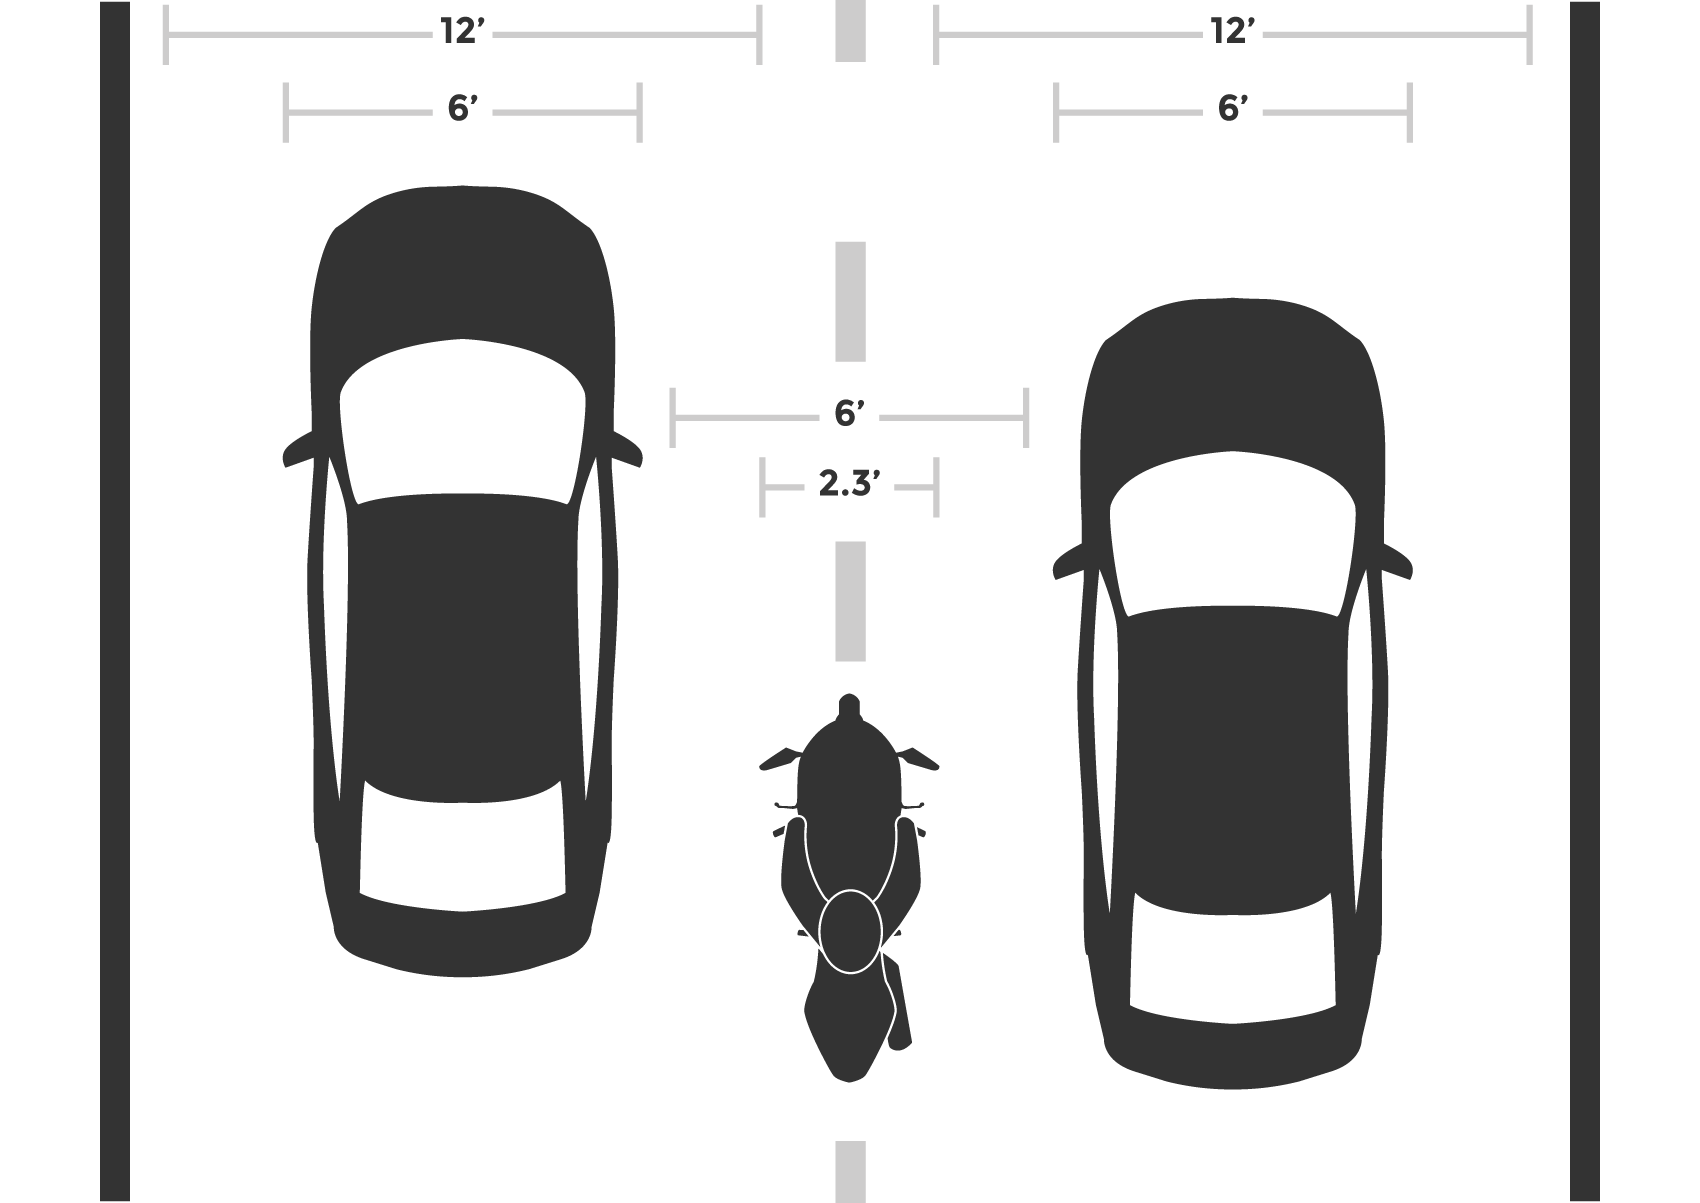 Lane splitting is not a crime – The Sunday Best, a ...